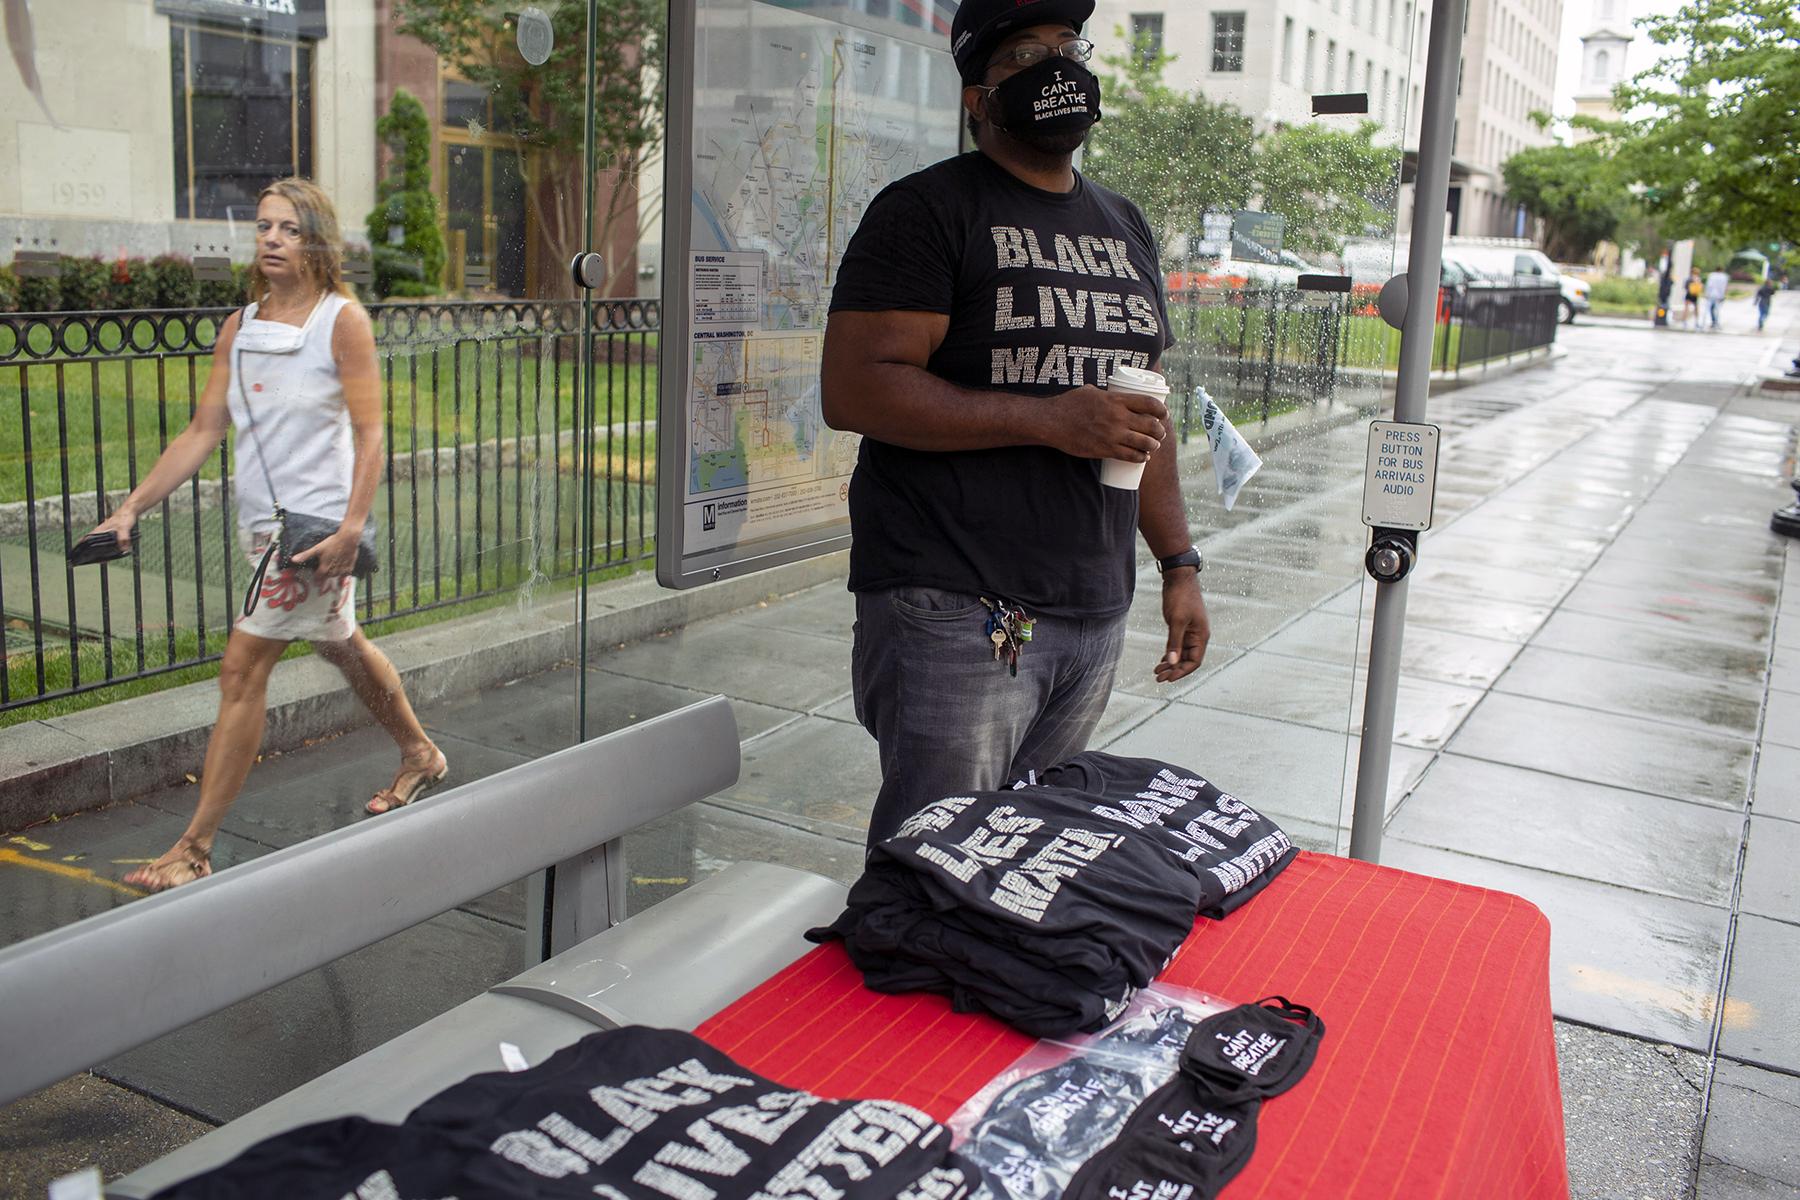 Protests, Pestilence & Politics - Tay Paige has been out selling t-shirts and face masks...